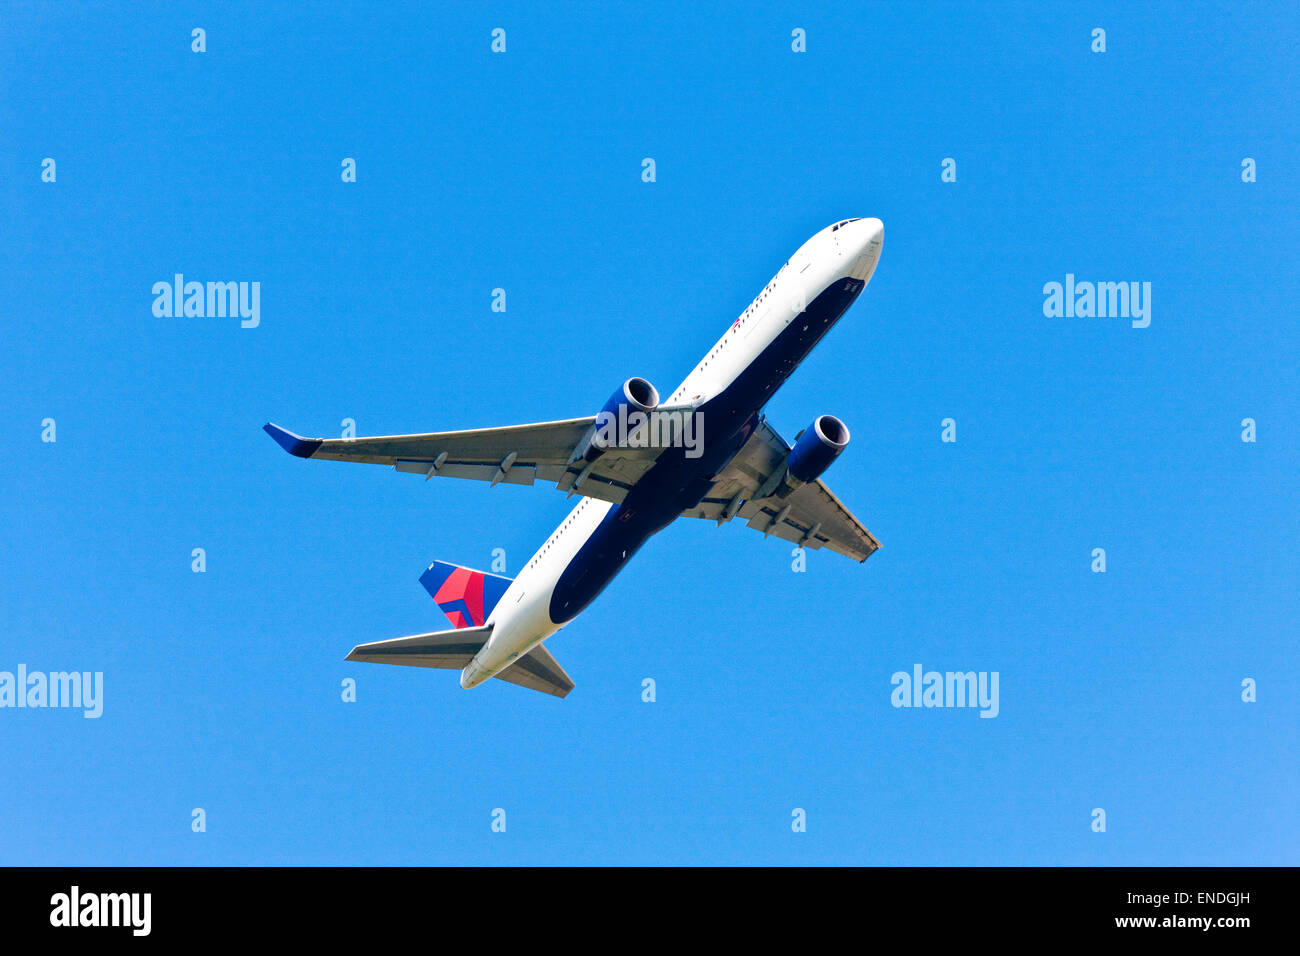 Boeing 767-332(ER) from Delta Airlines taking off Stock Photo - Alamy